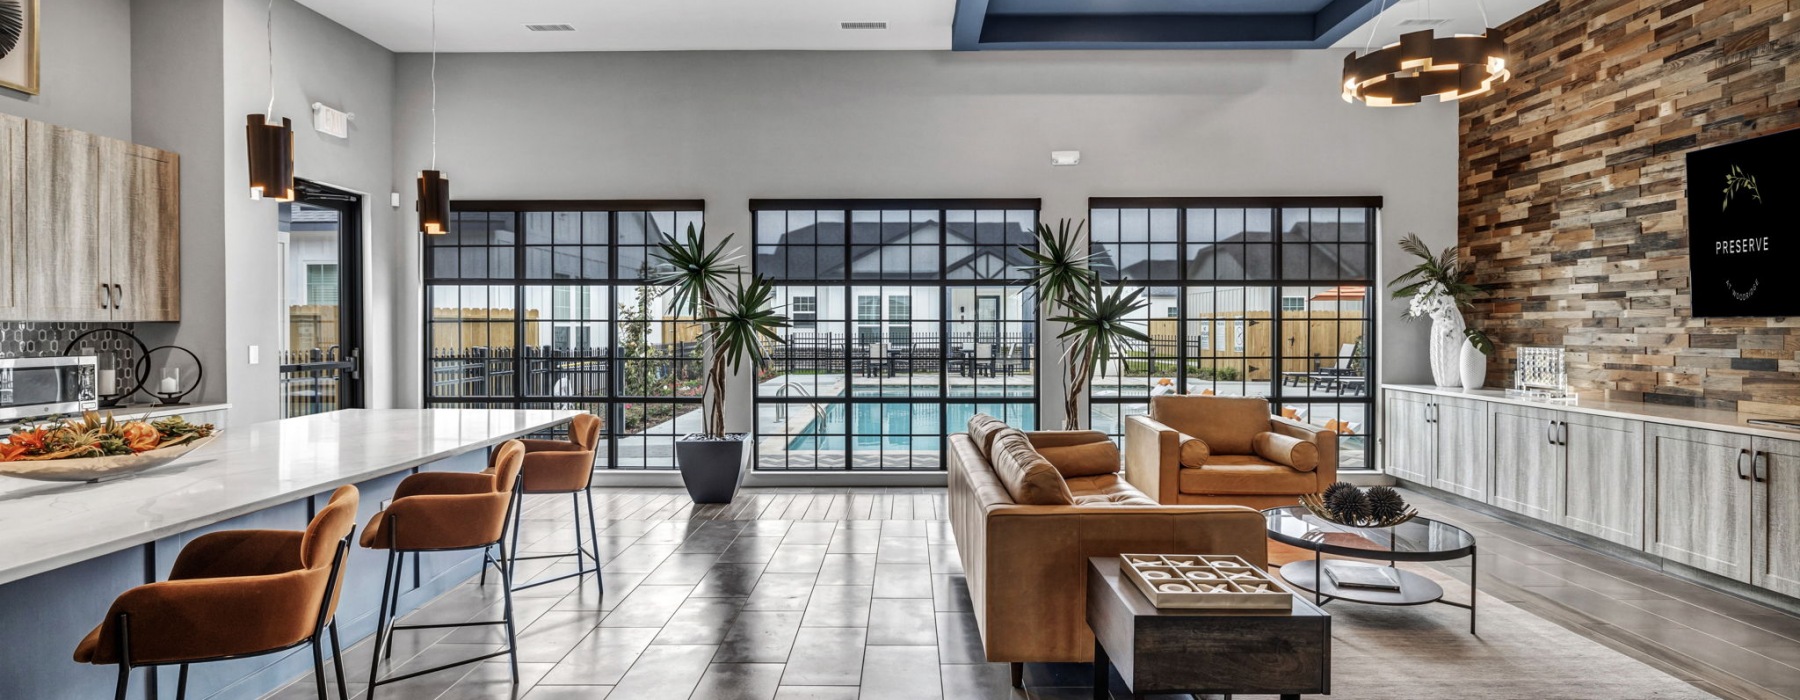 Spacious community kitchen with large windows with a view of the pool 